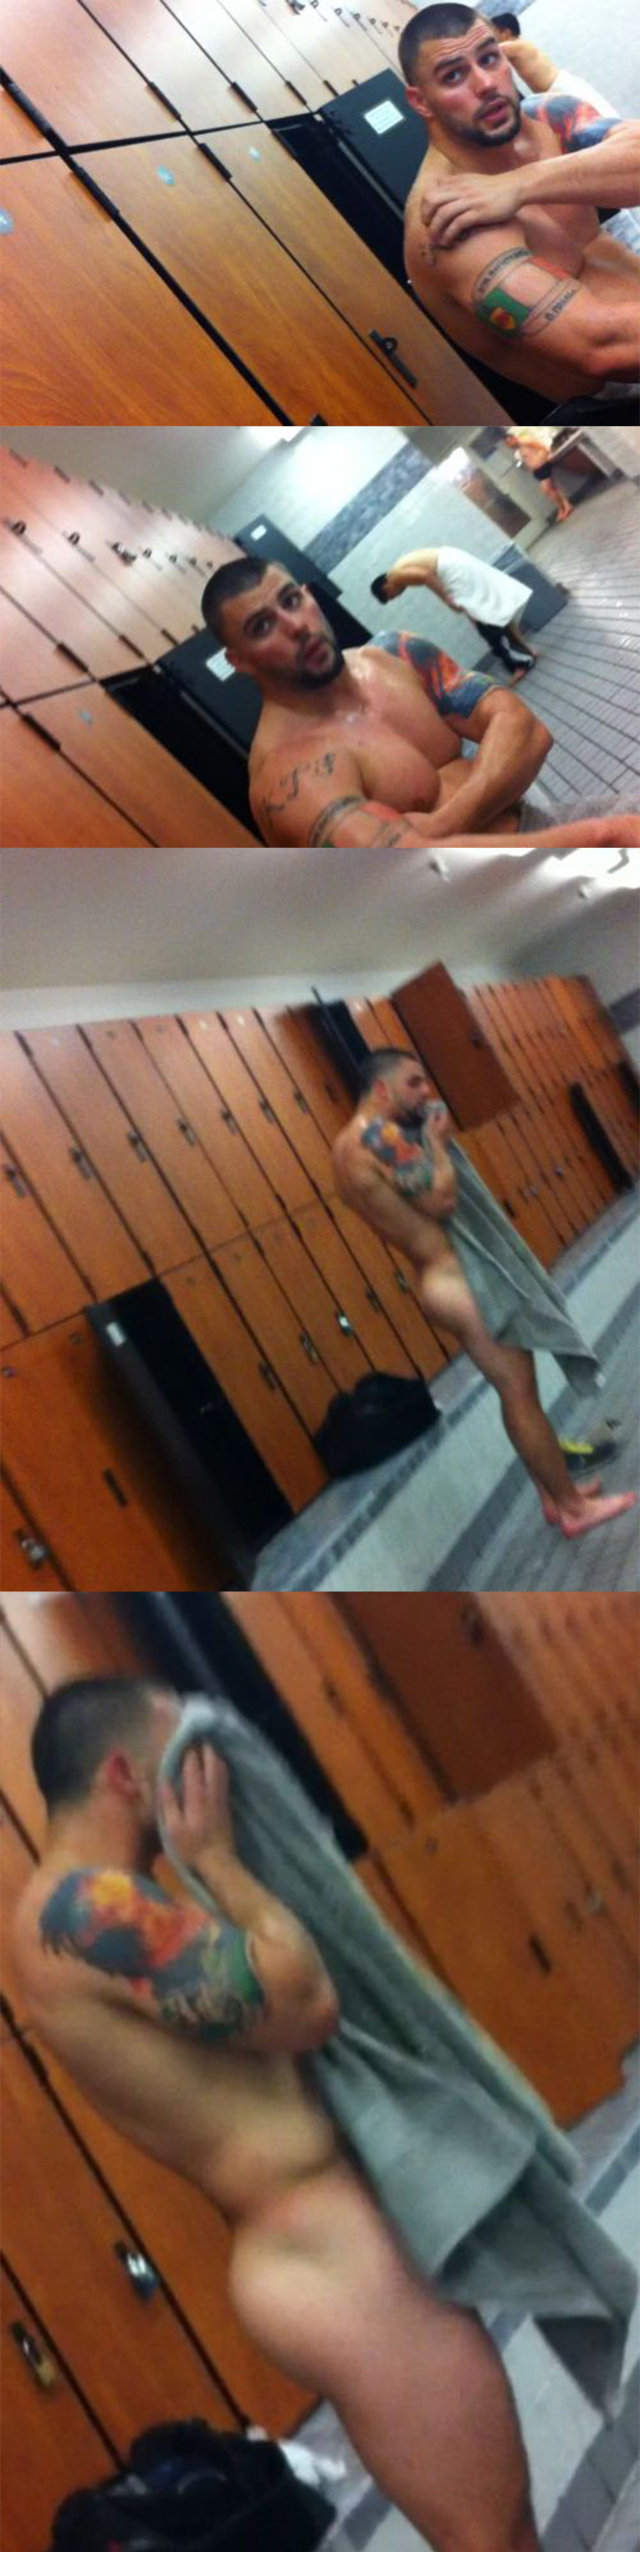 spycam from muscled stud naked locker room gym